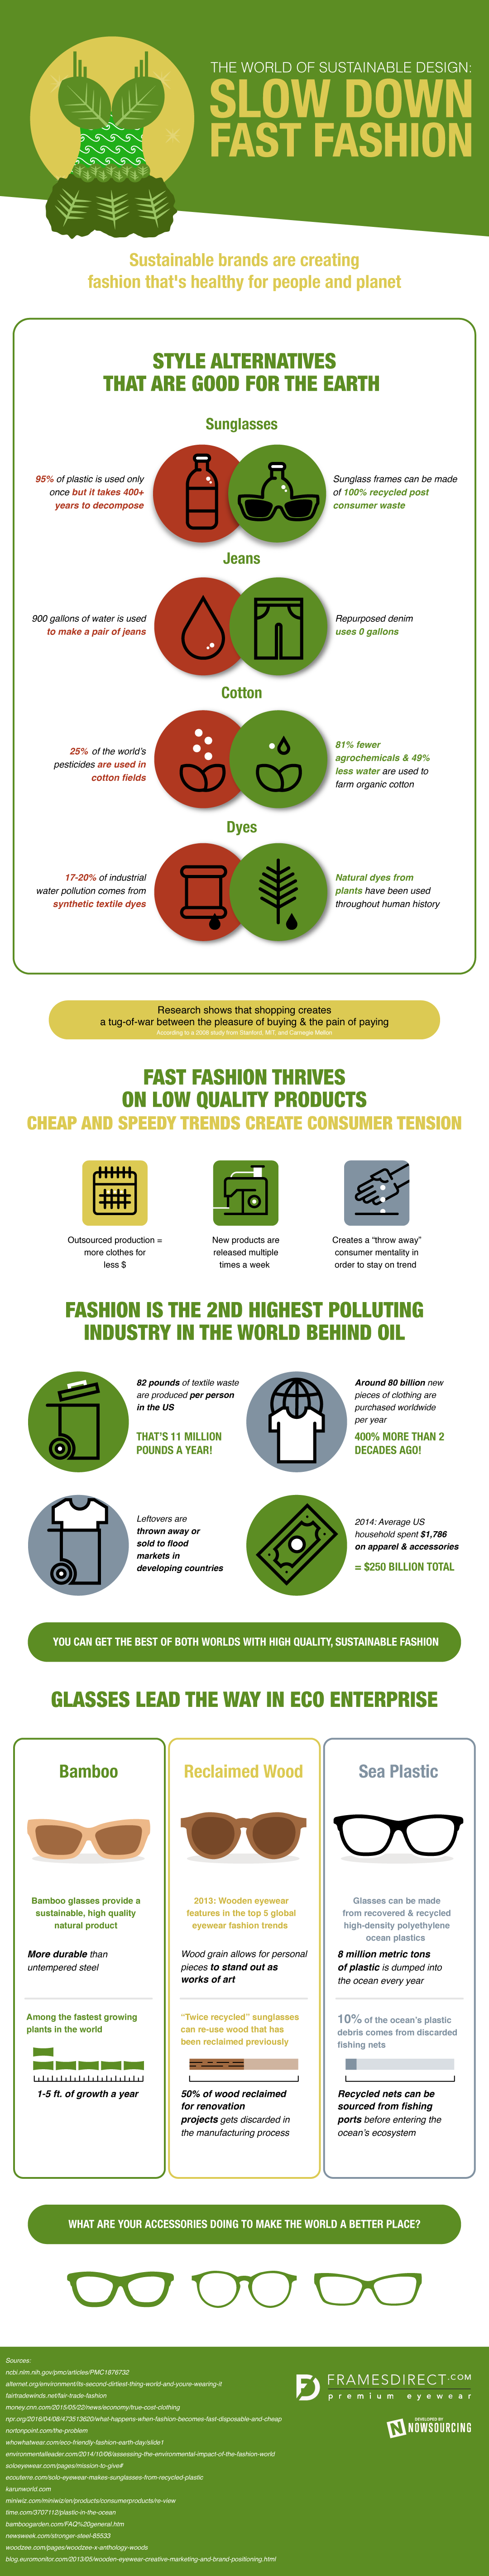 Slow Down Of Fast Fashion